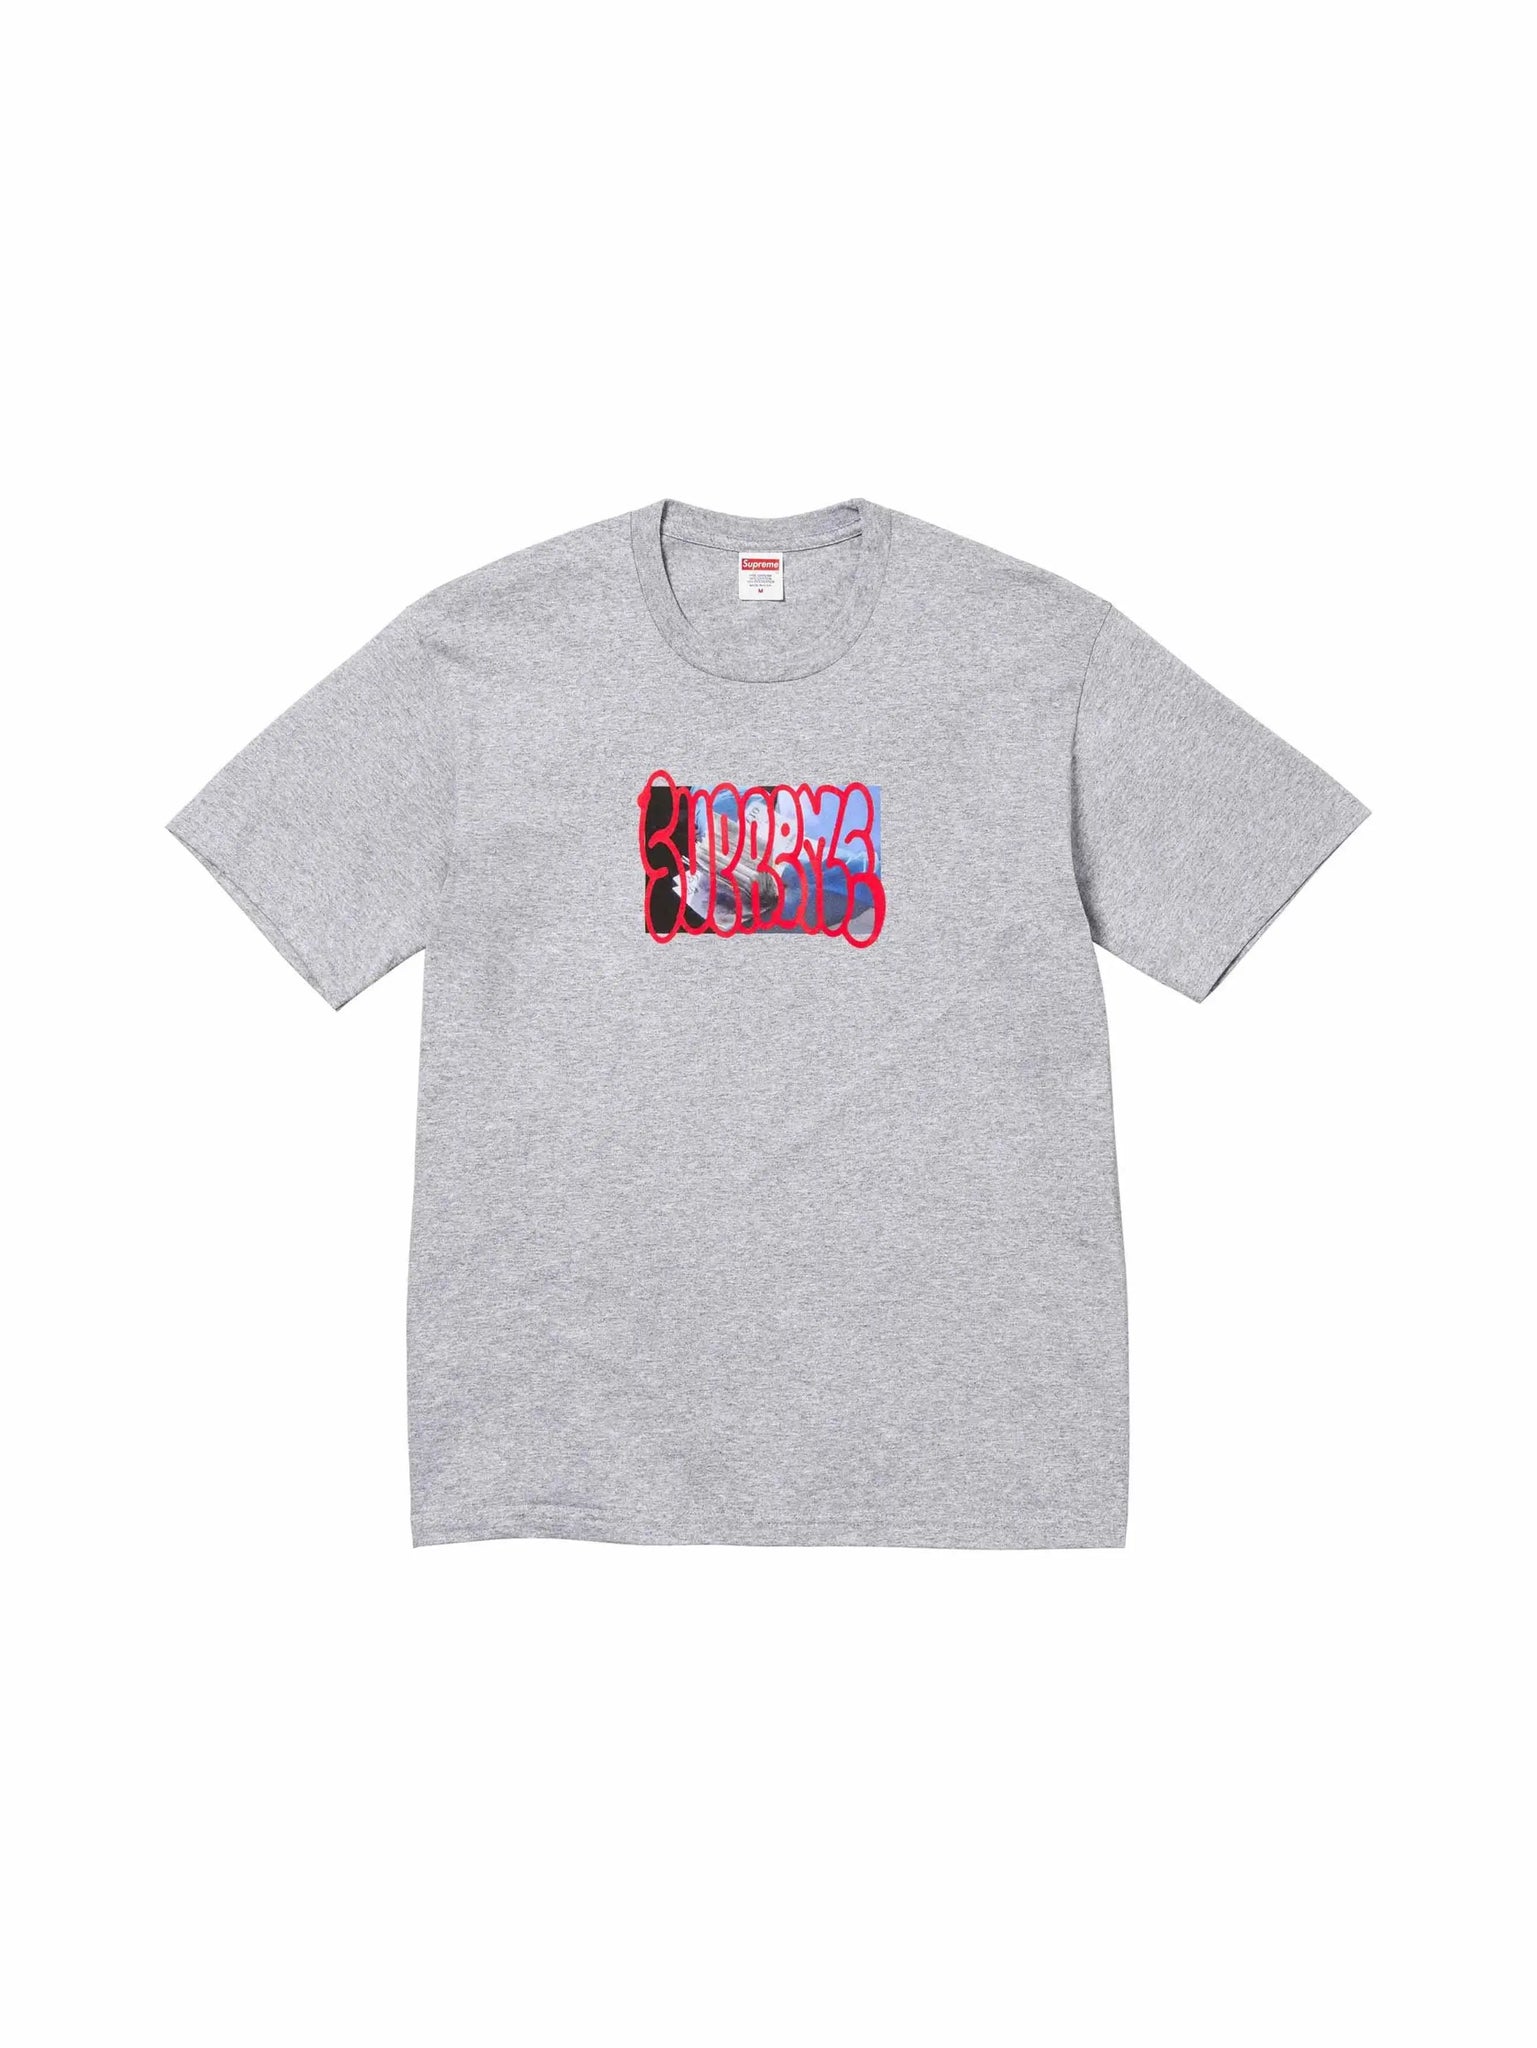 Supreme Payment Tee Heather Grey in Auckland, New Zealand - Shop name